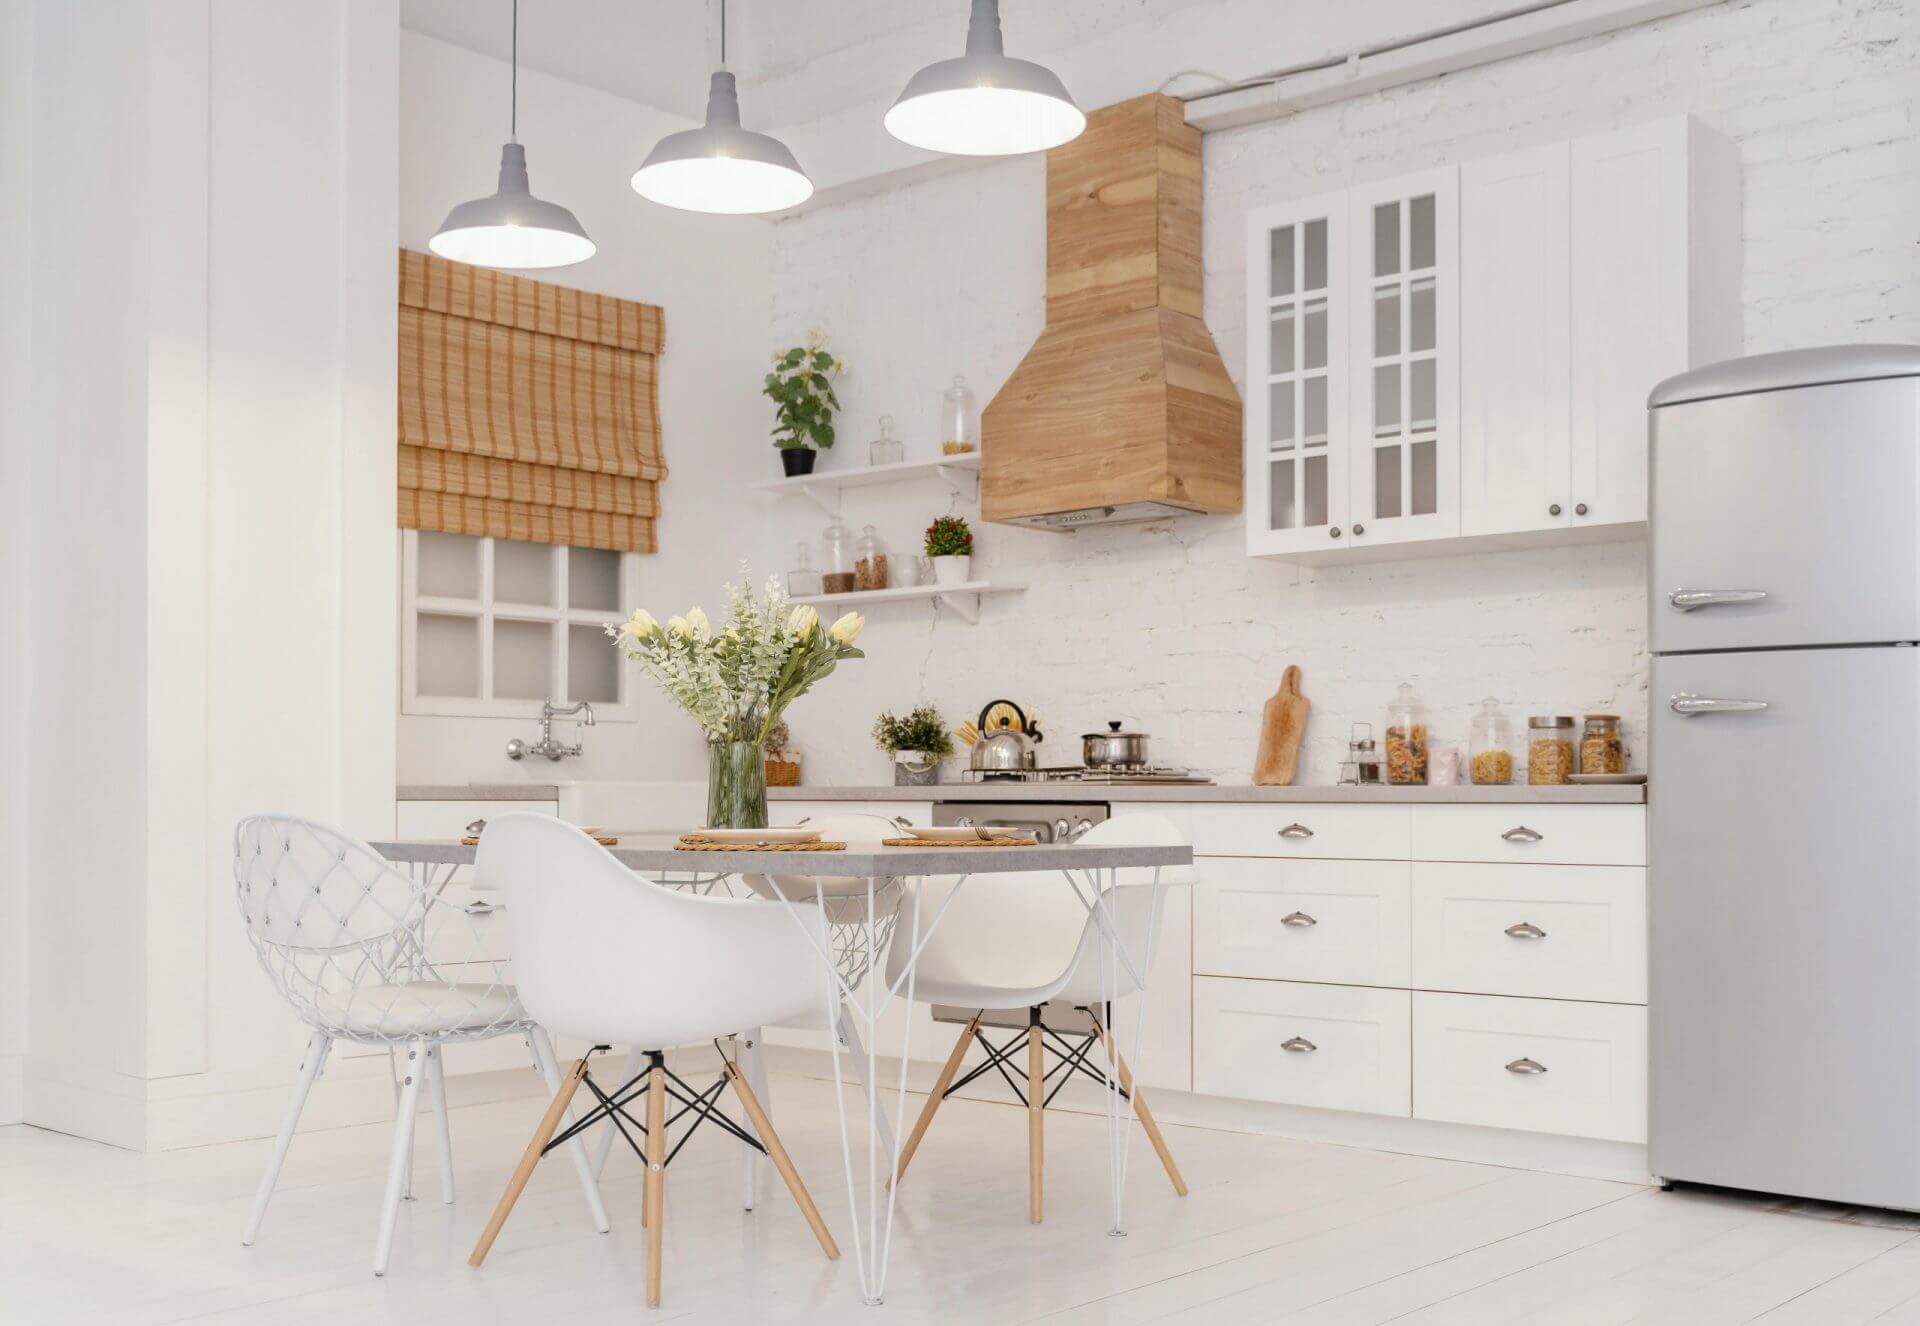 5 Reasons You Need A Professional Kitchen Designer